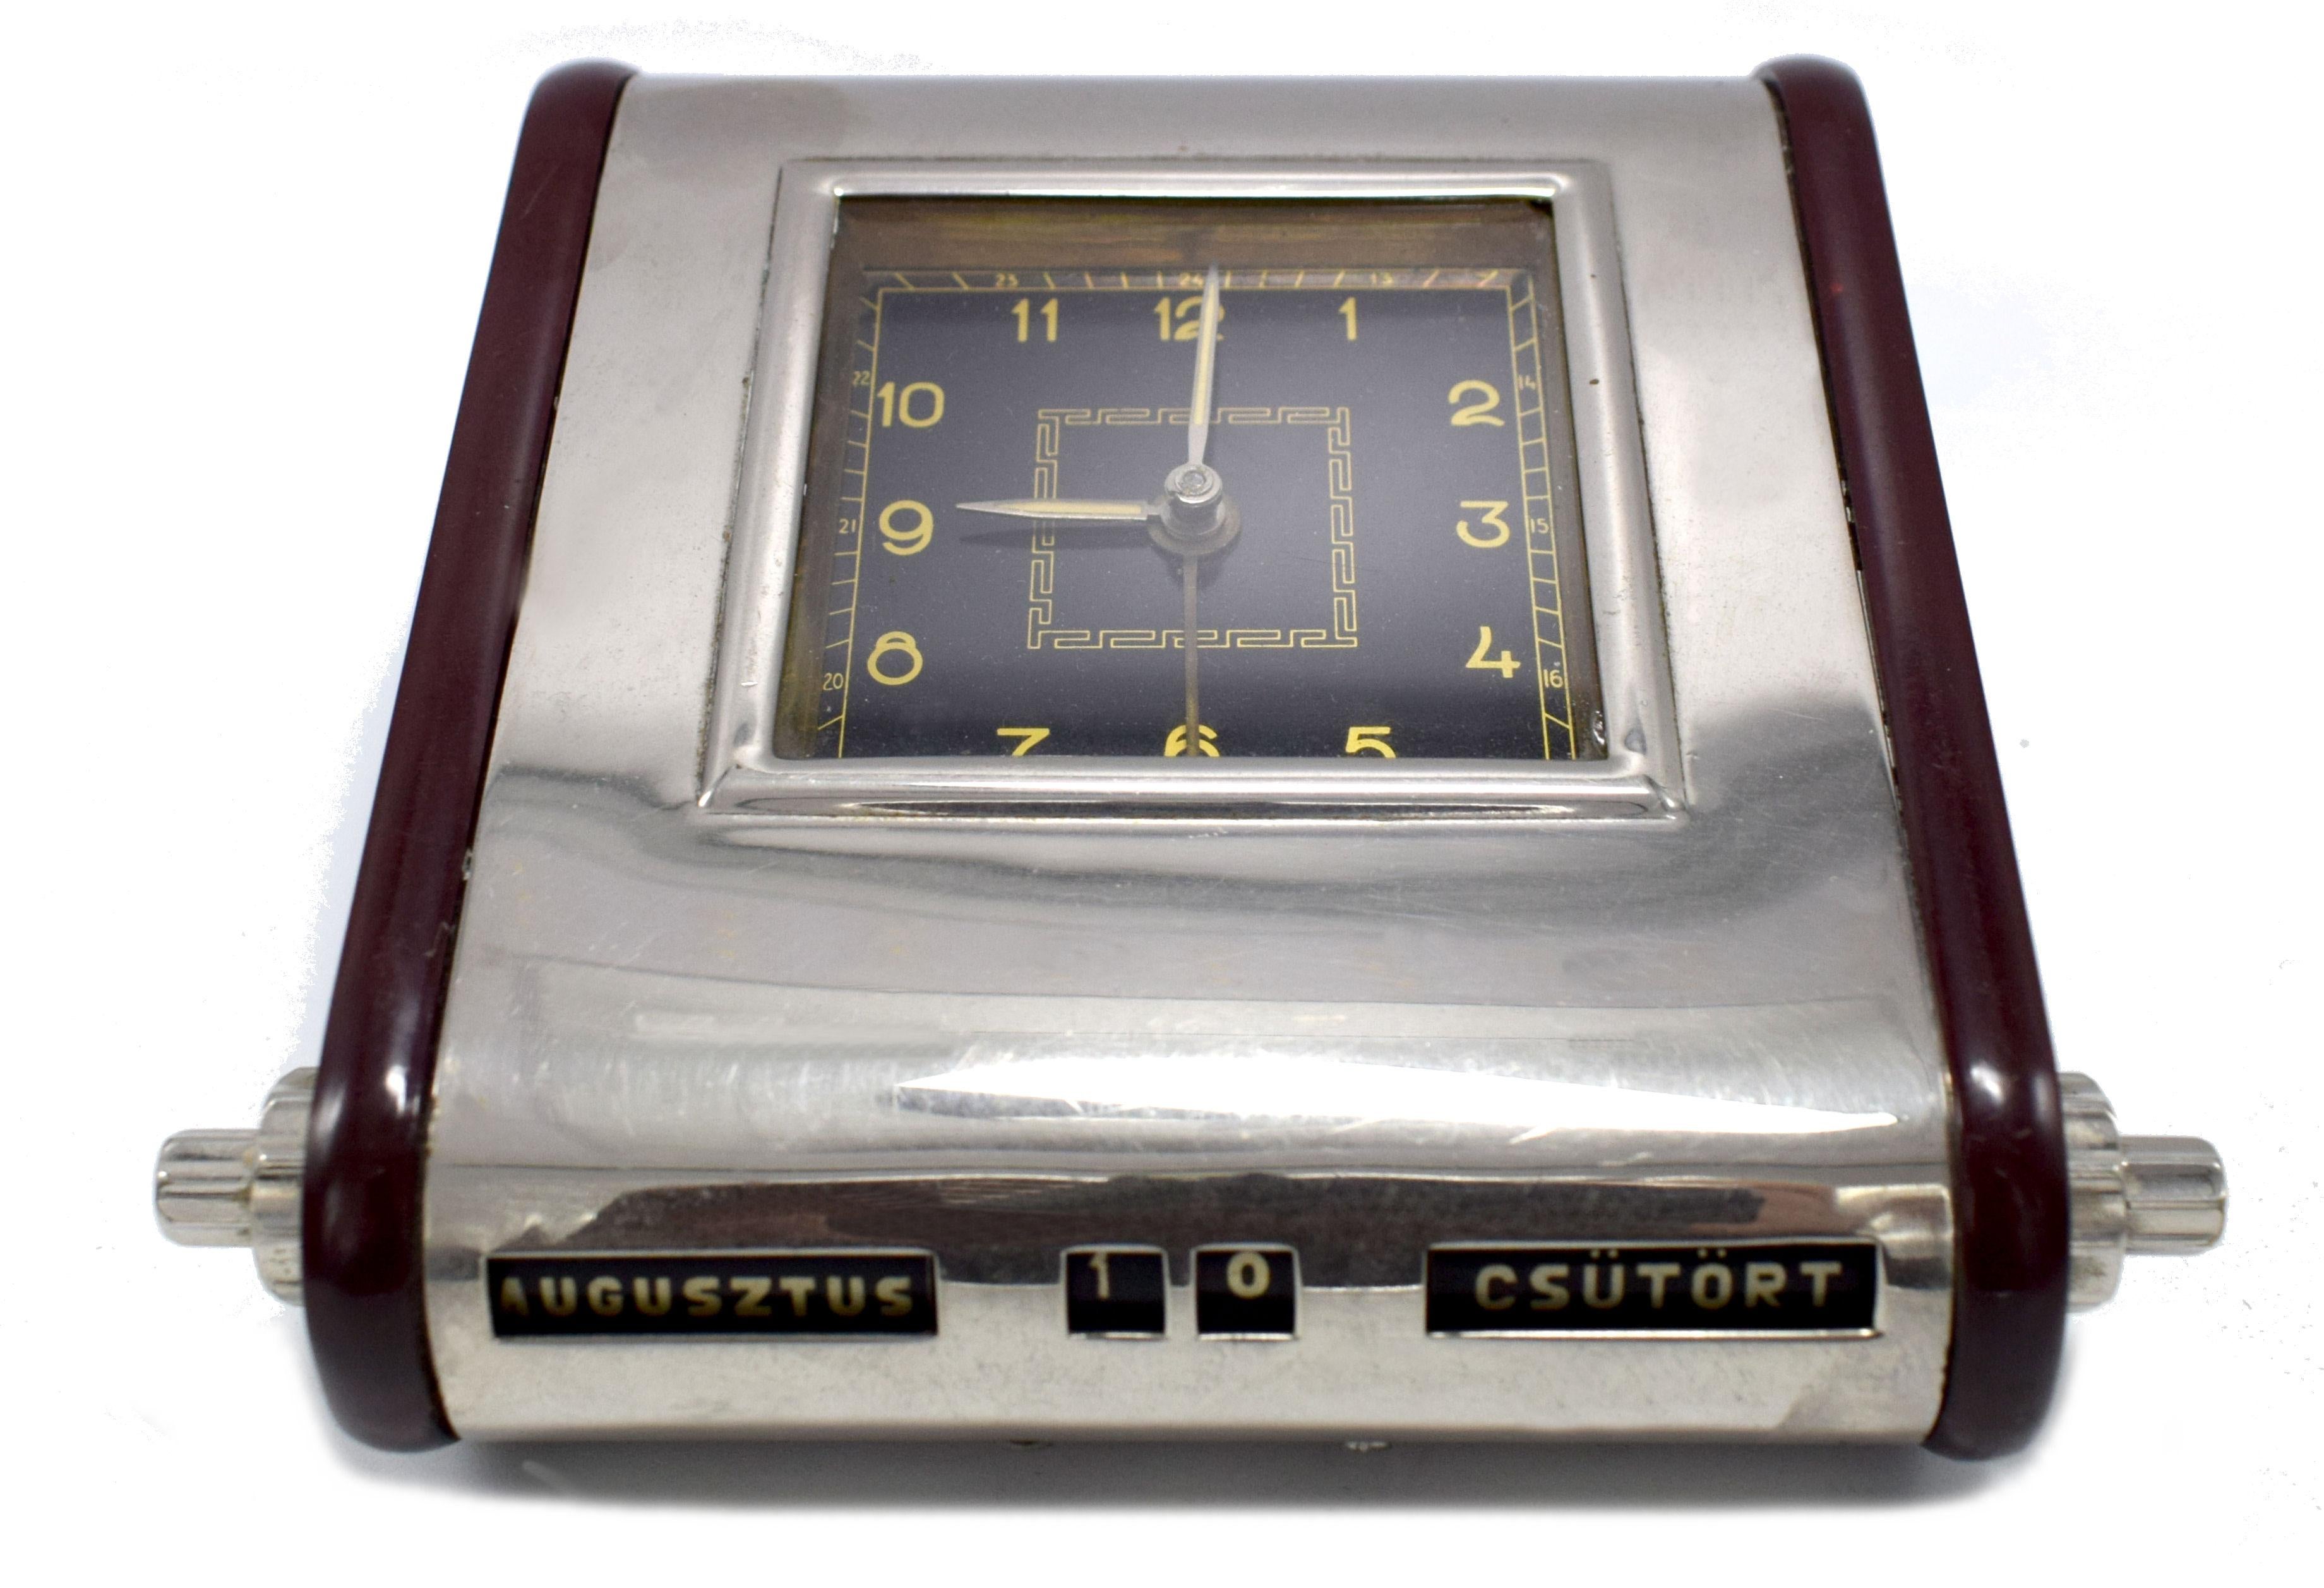 Perfect Hungarian Art Deco Bakelite table clock in great condition from 1930s. Works excellent and is punctual! Alarm function silent-able. A good sized clock, perfect for desks, side tables etc. Made by Hungarian MOFÉM, manufacturer's mark on the